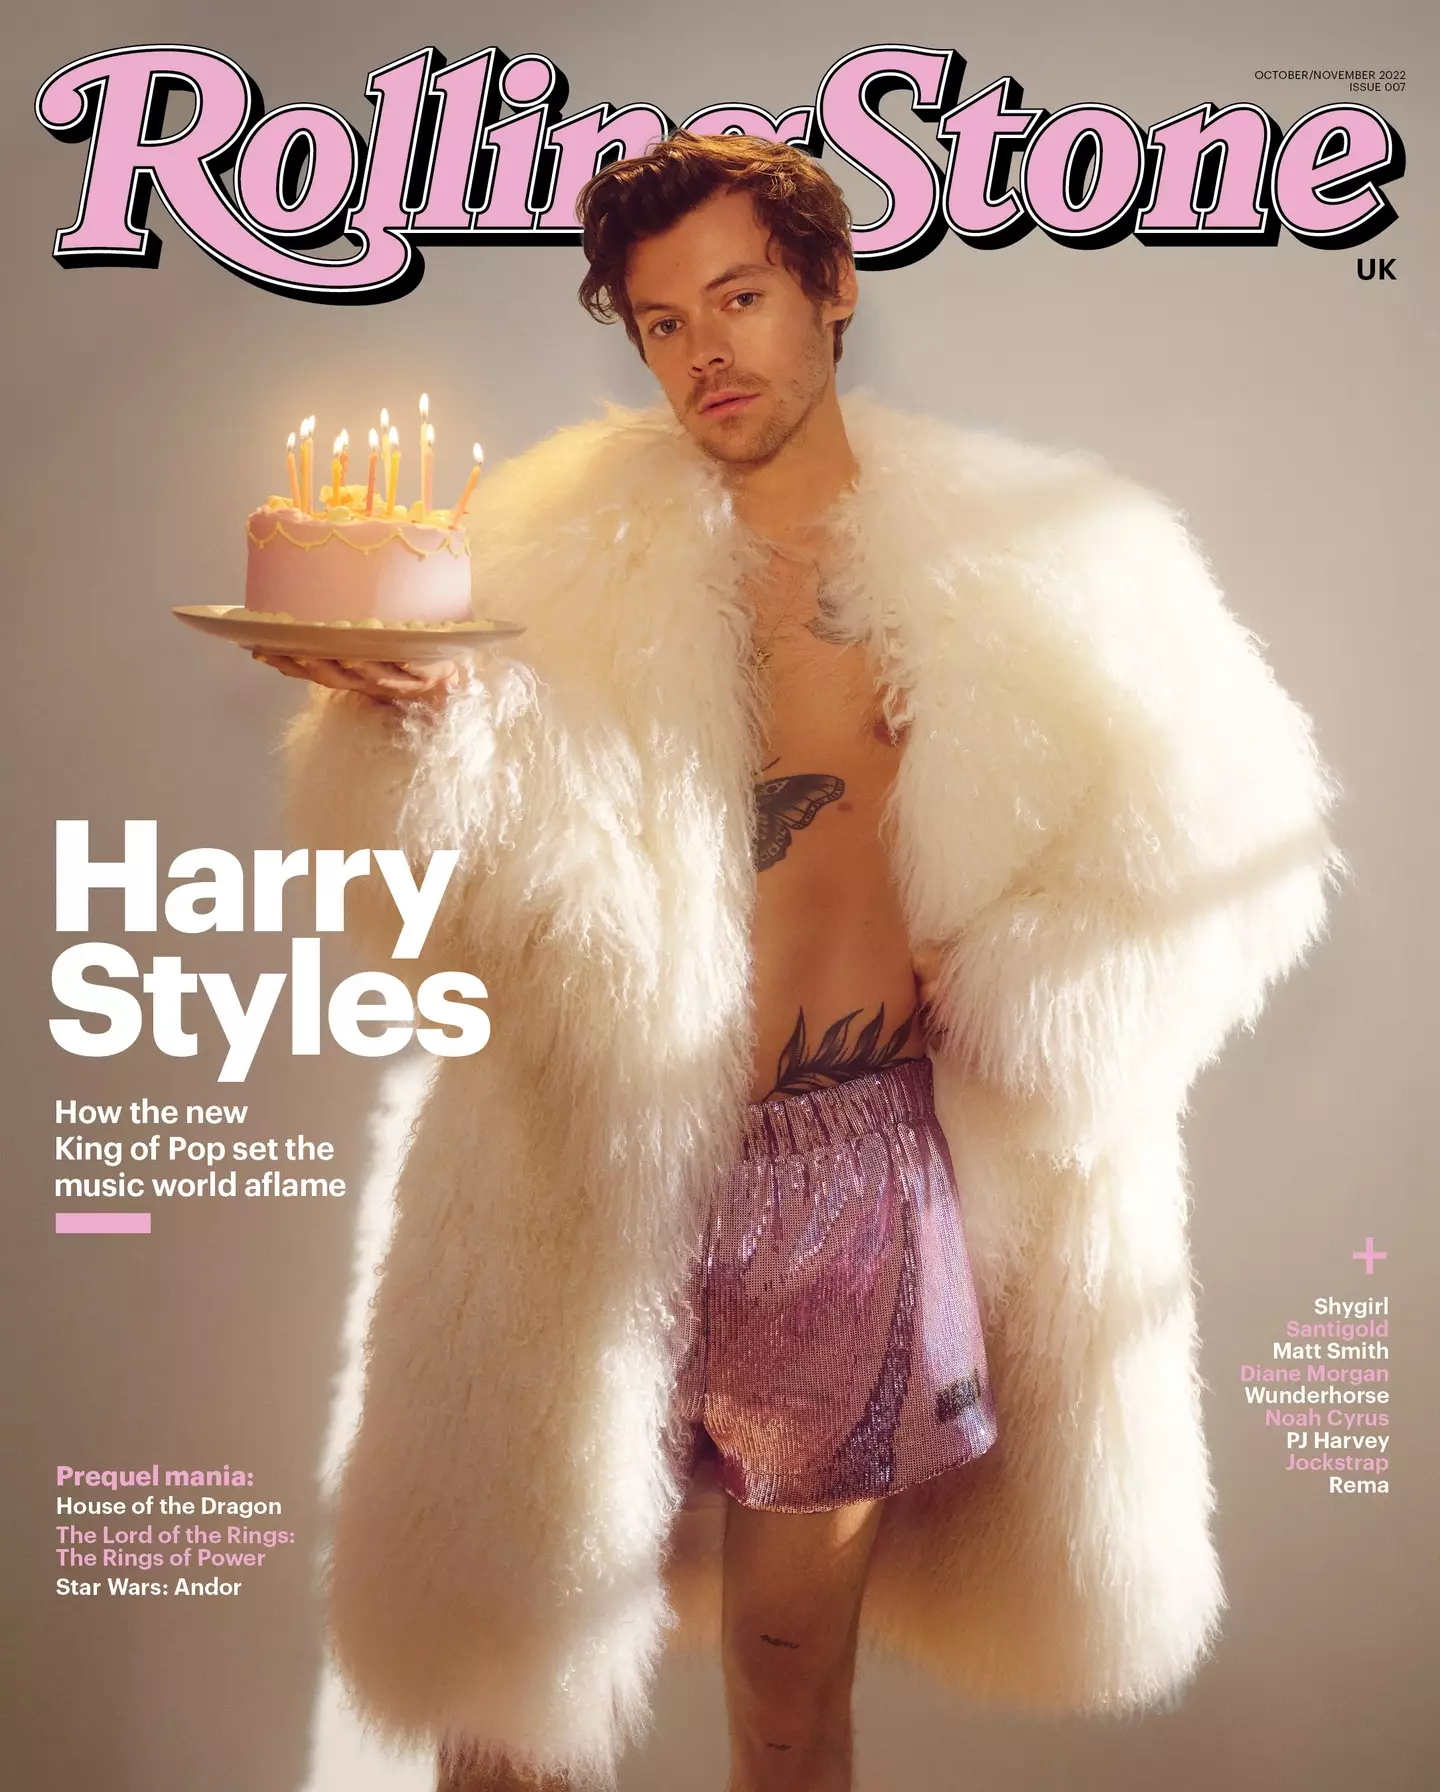 Rolling Stone proclaimed Harry Styles the 'new King of Pop'.